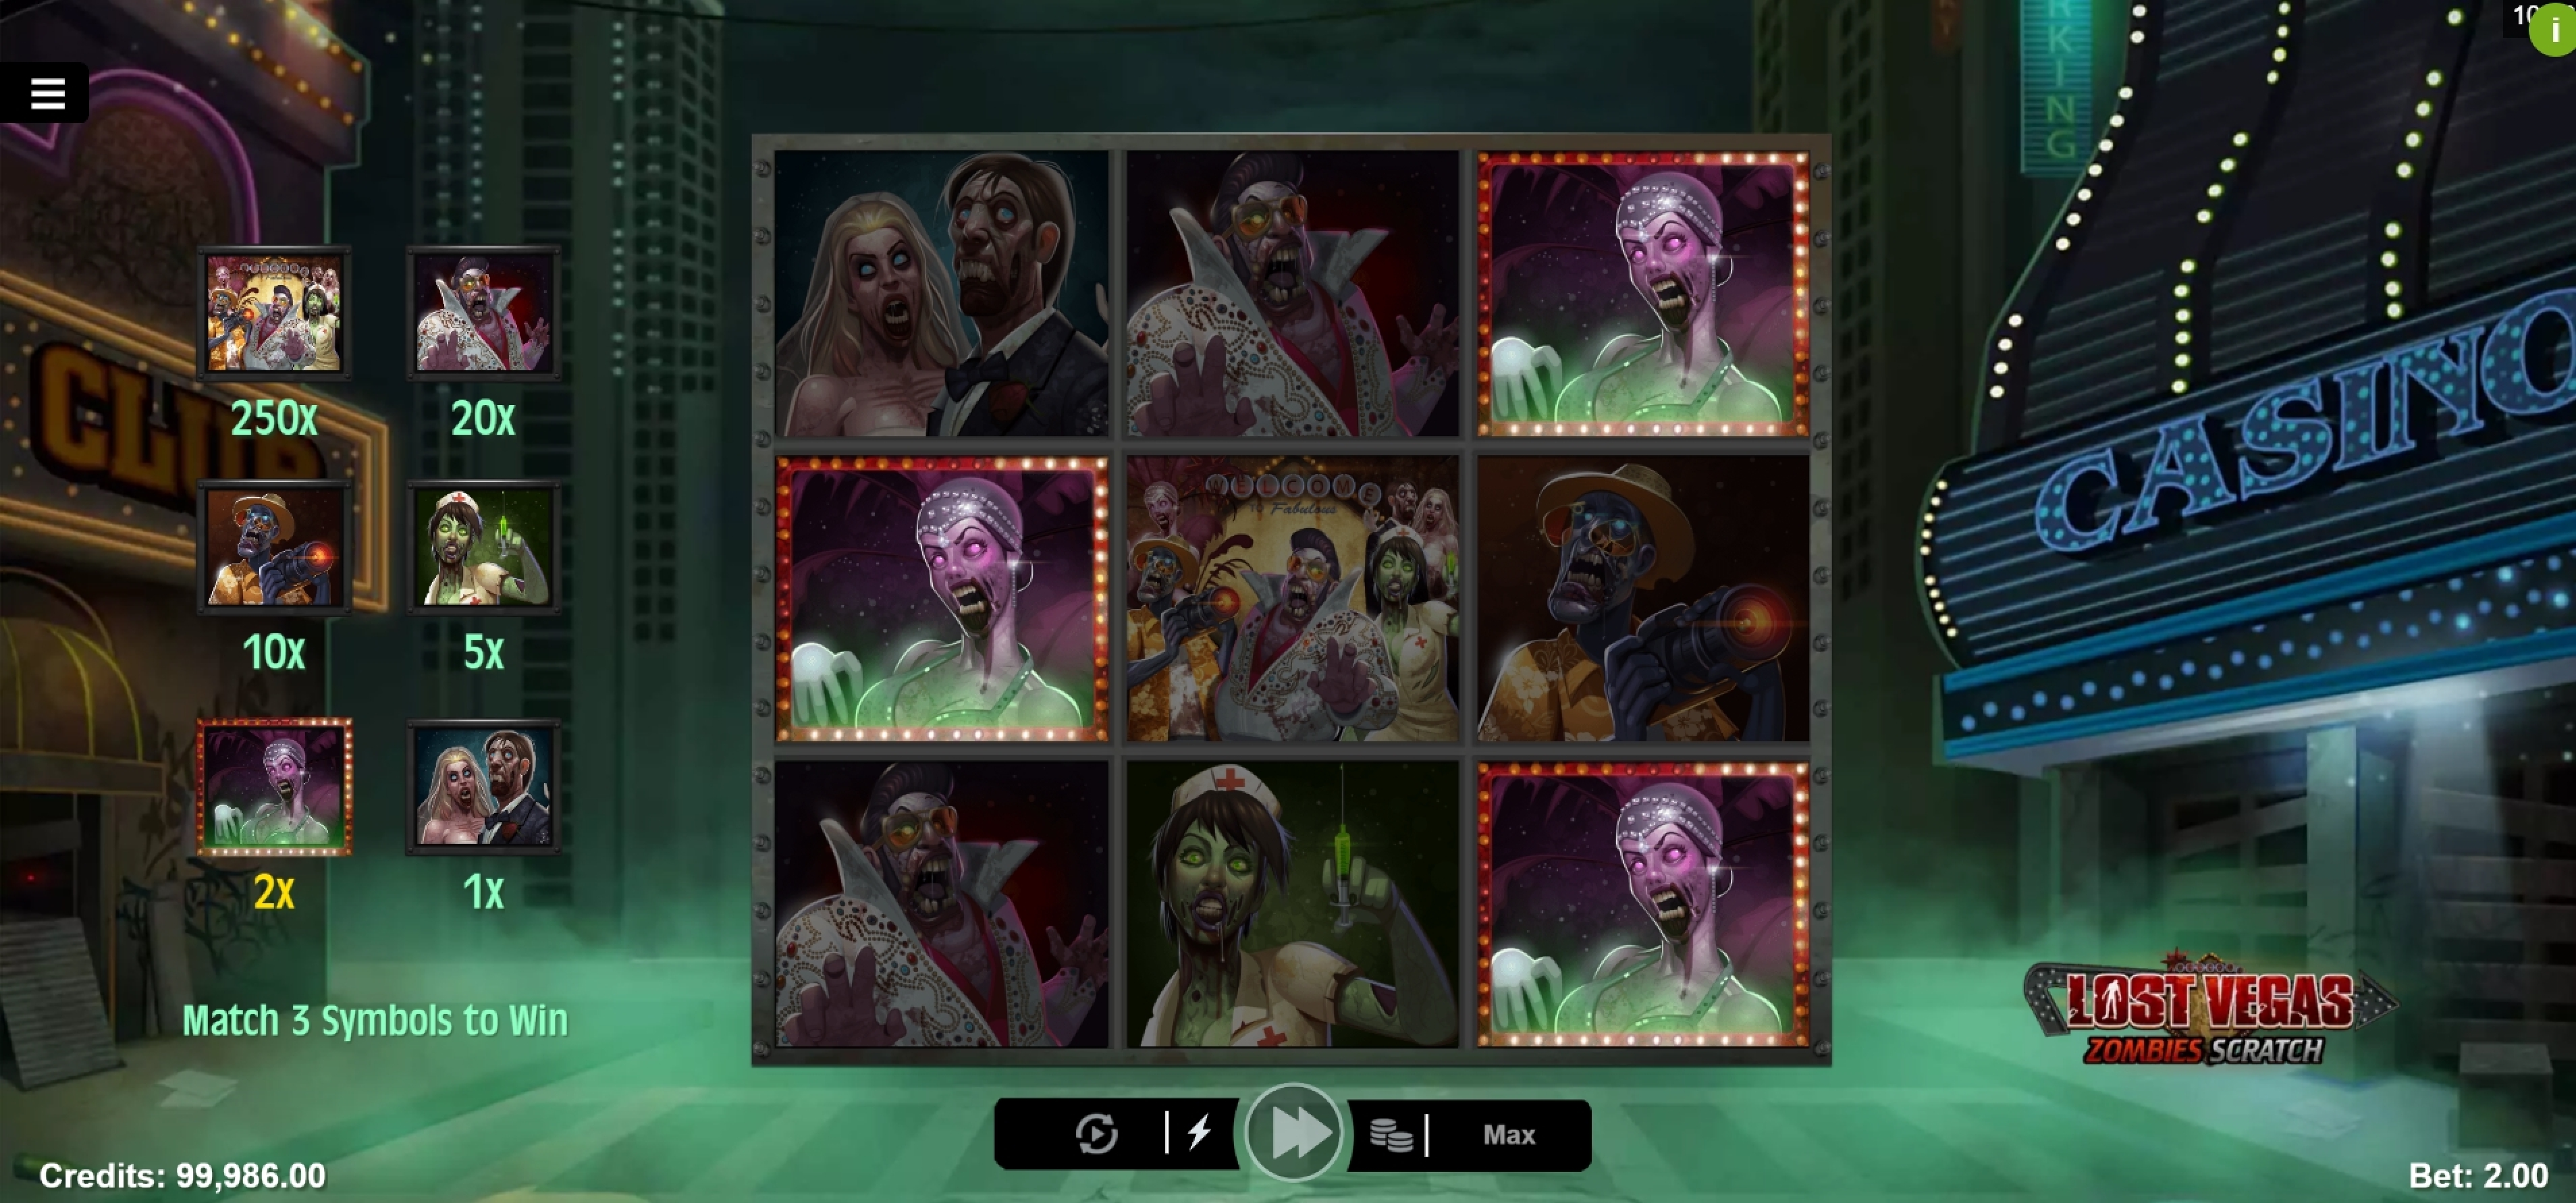 Win Money in Lost Vegas Zombie Scratch Free Slot Game by Microgaming